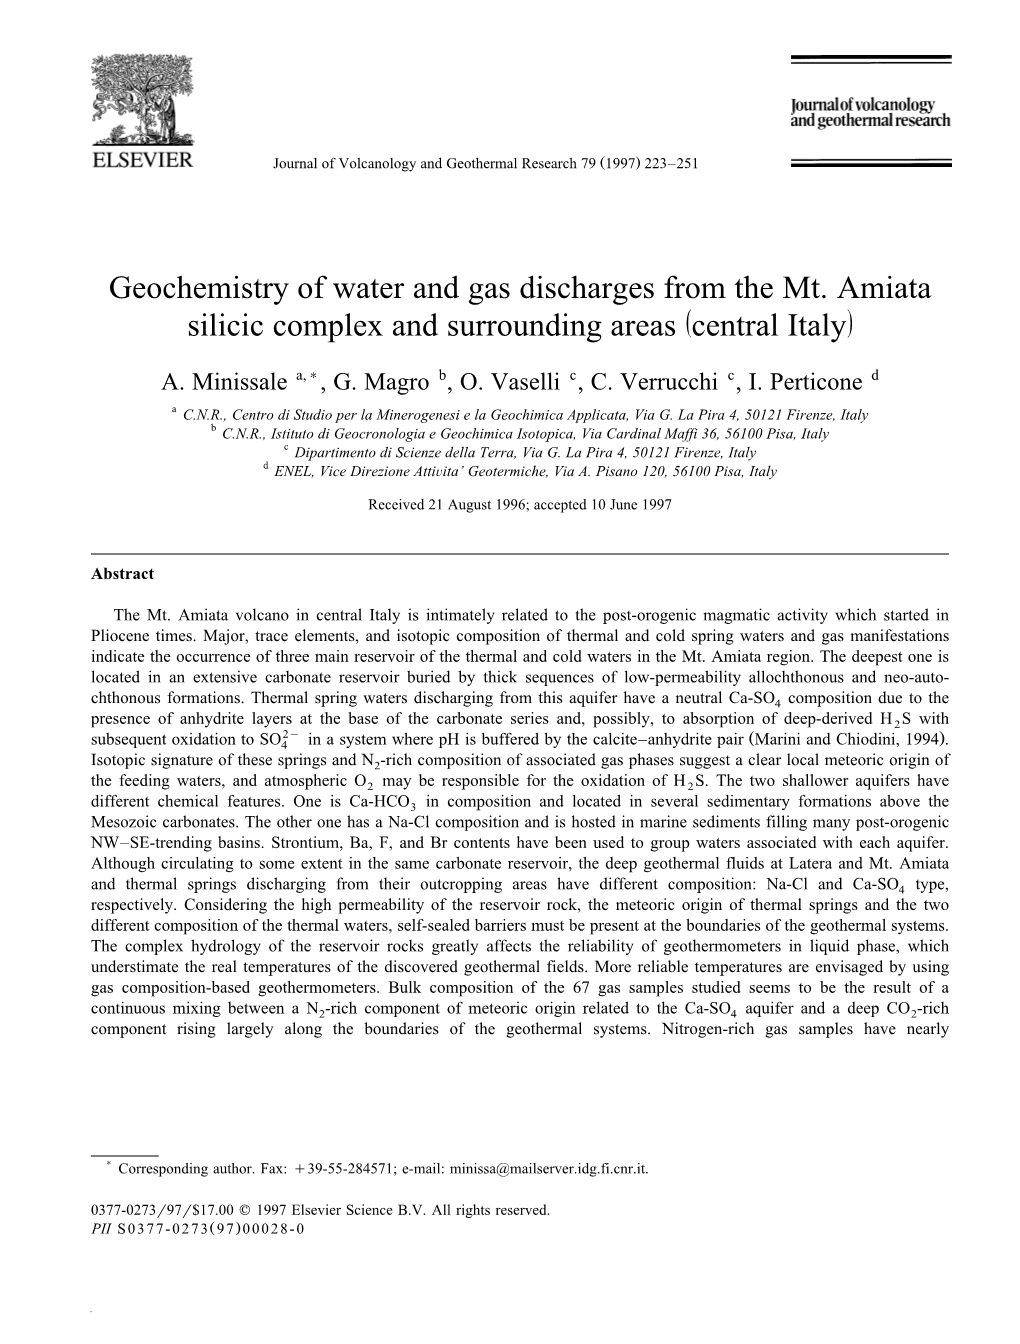 Geochemistry of Water and Gas Discharges from the Mt. Amiata Ž